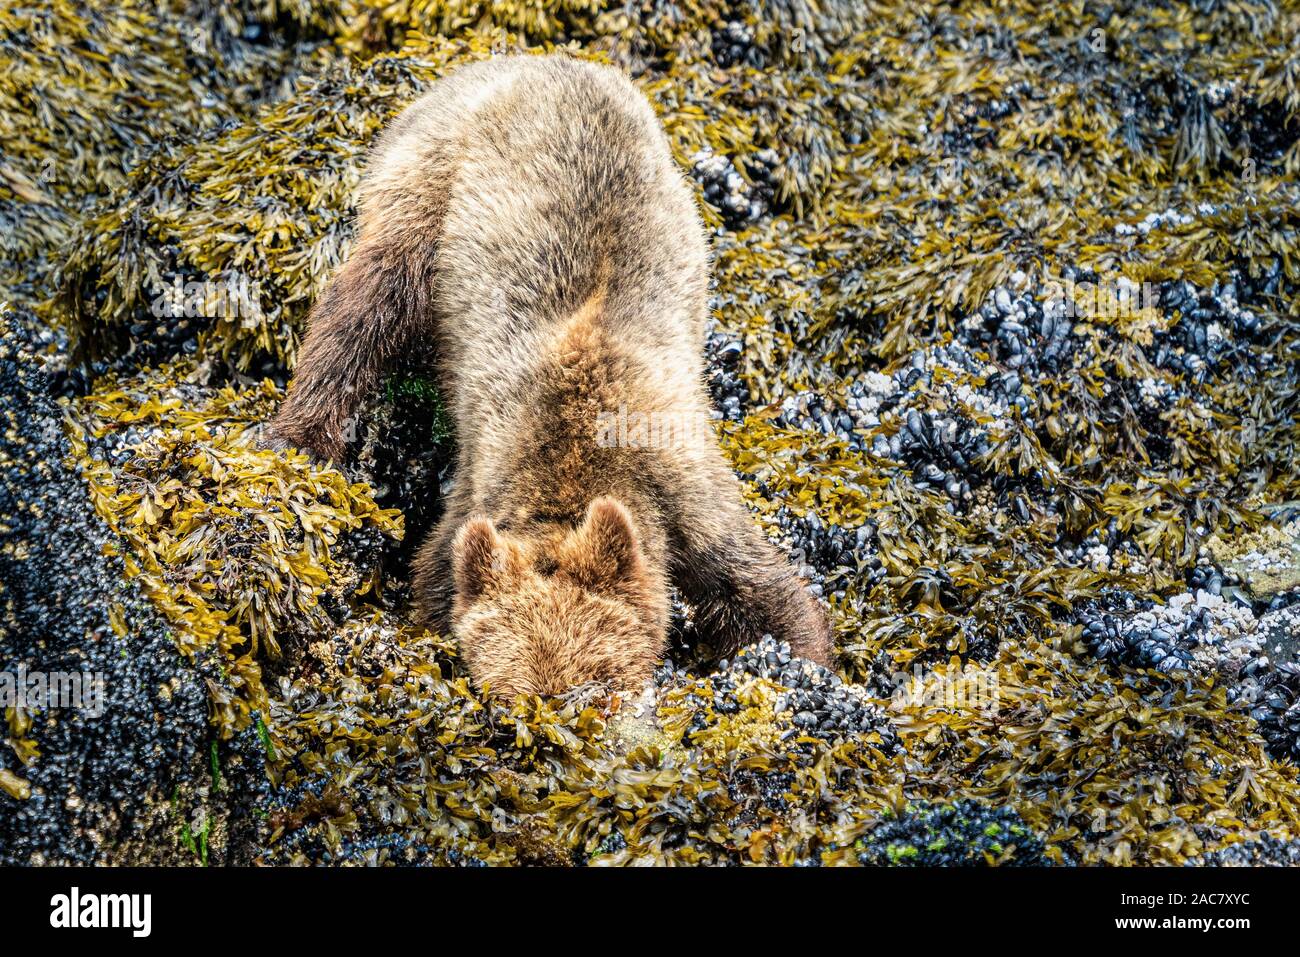 Sub-adult grizzly searching for food underneath rocks along the low tide line in Knight Inlet, First Nations Territory, British Columbia, Canada Stock Photo